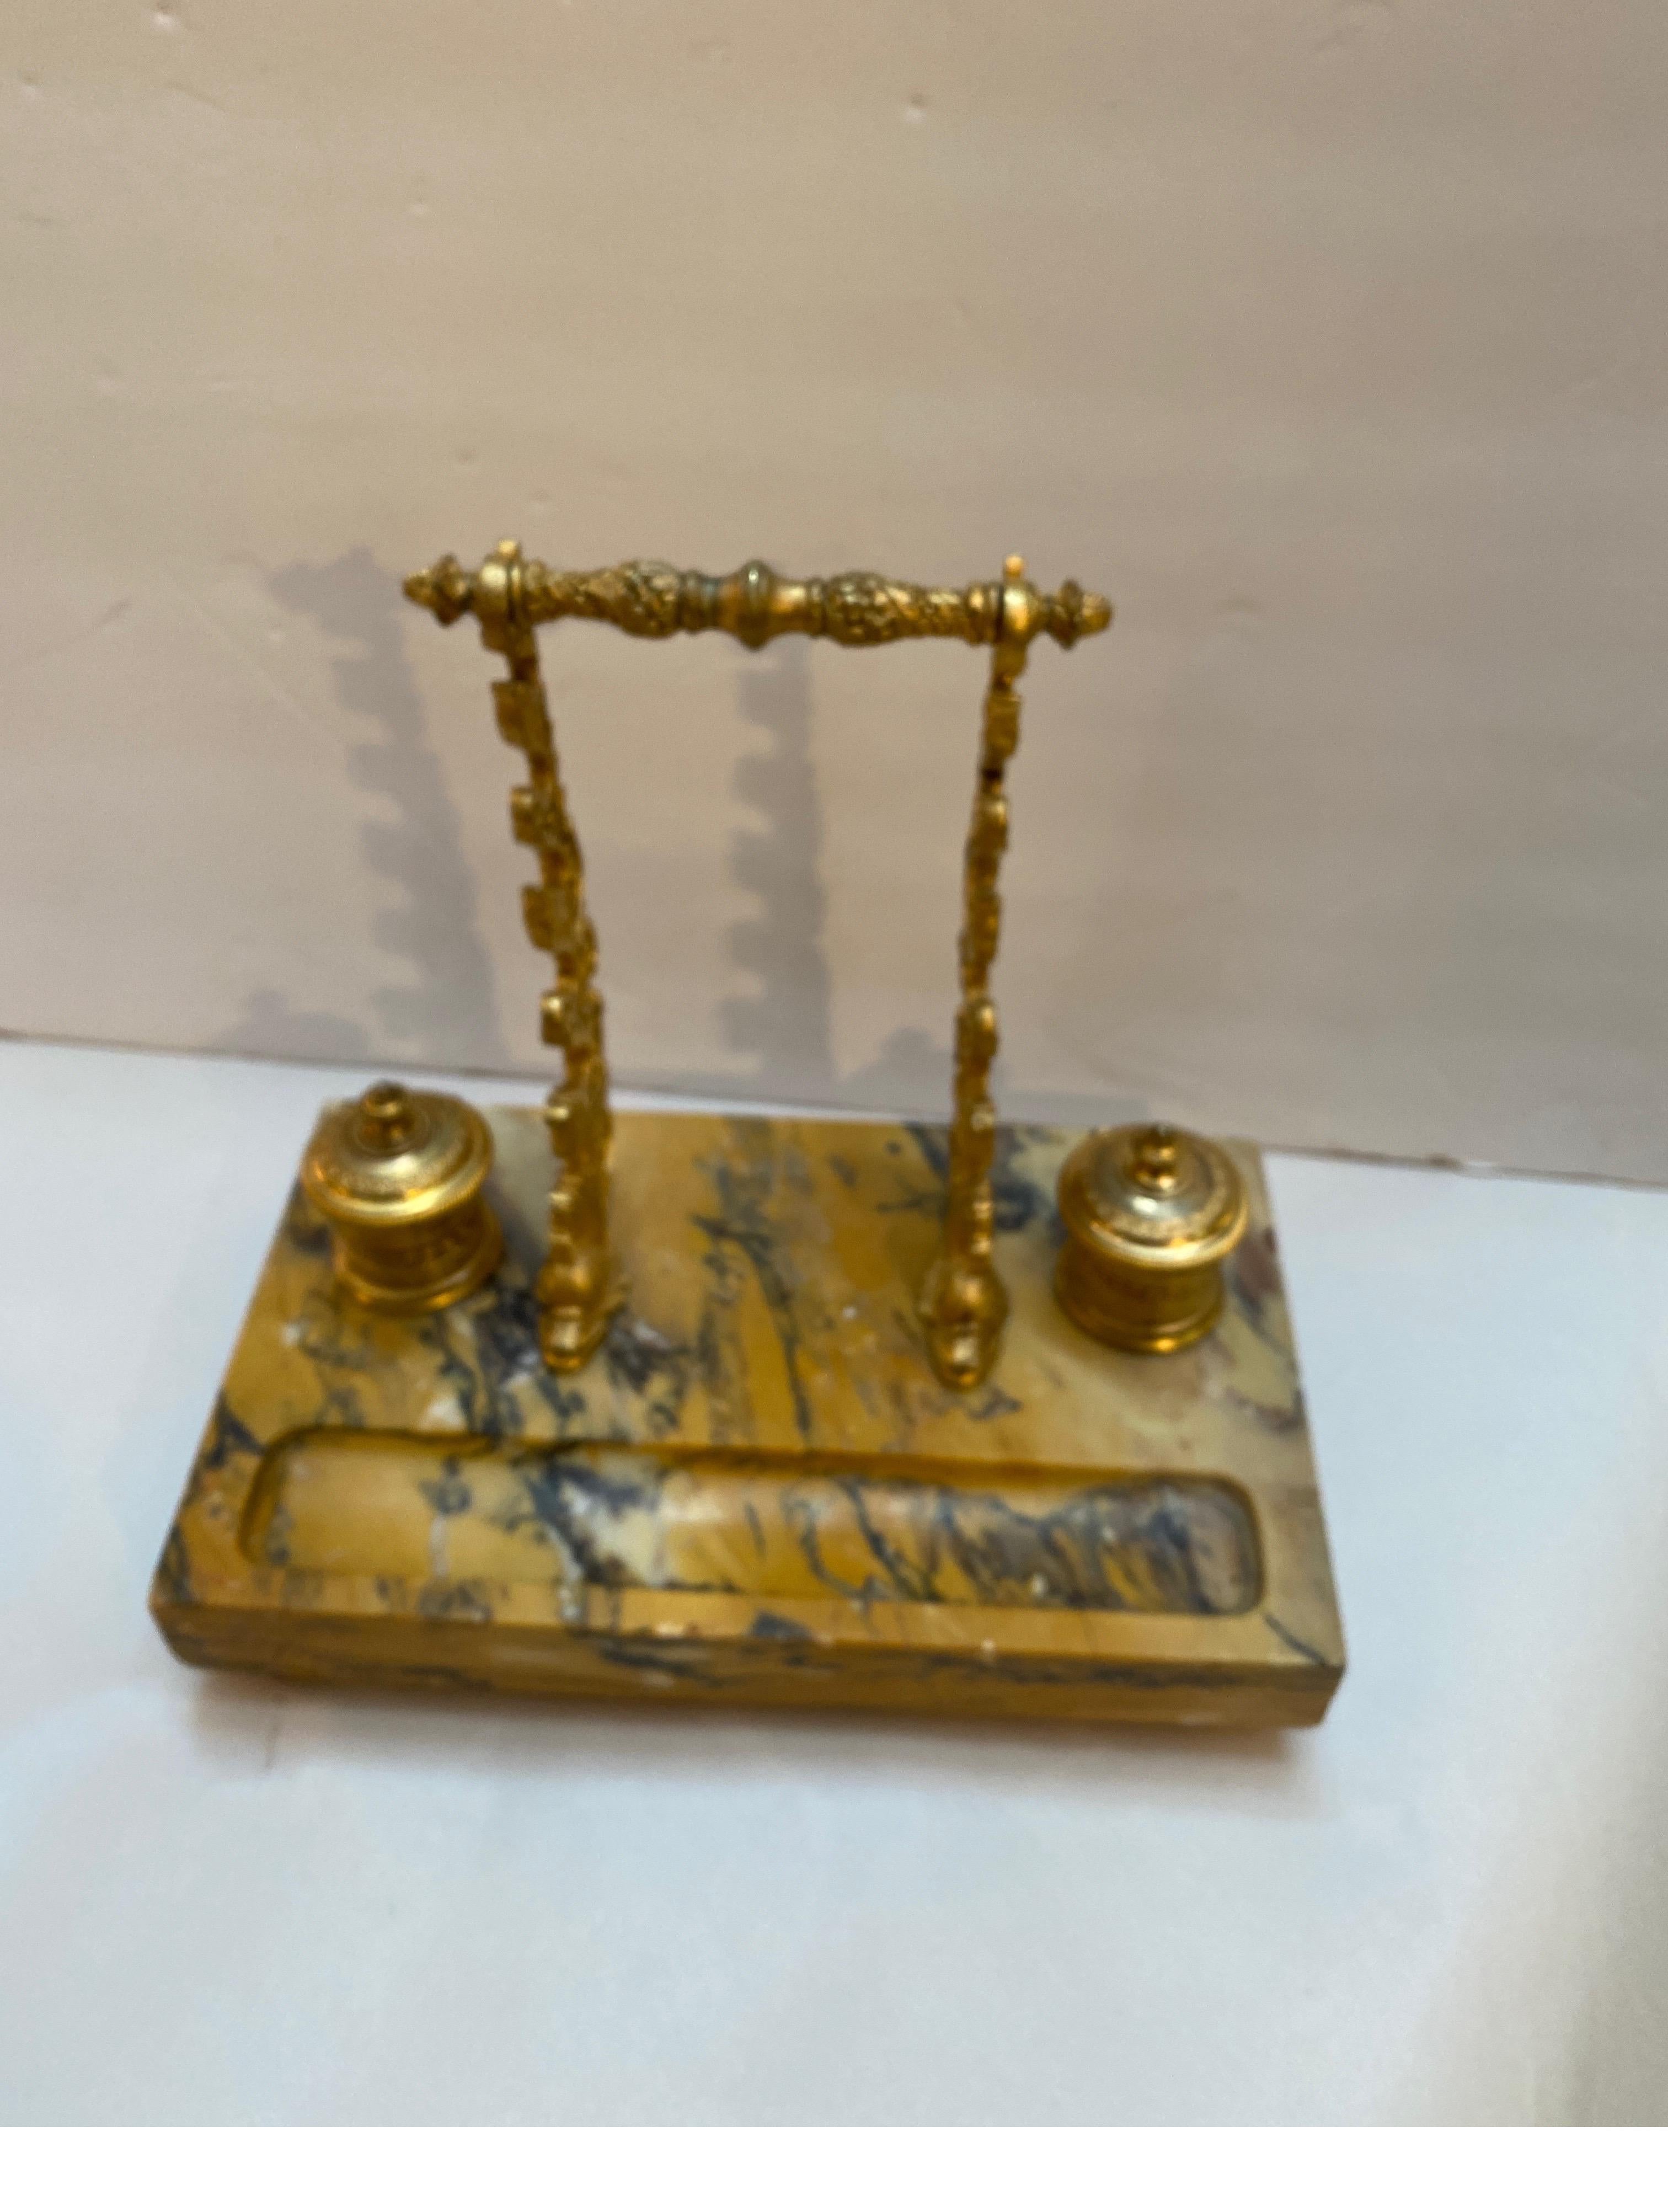 Siena Marble and Ormolu Double Inkstand Late 19th Century For Sale 1